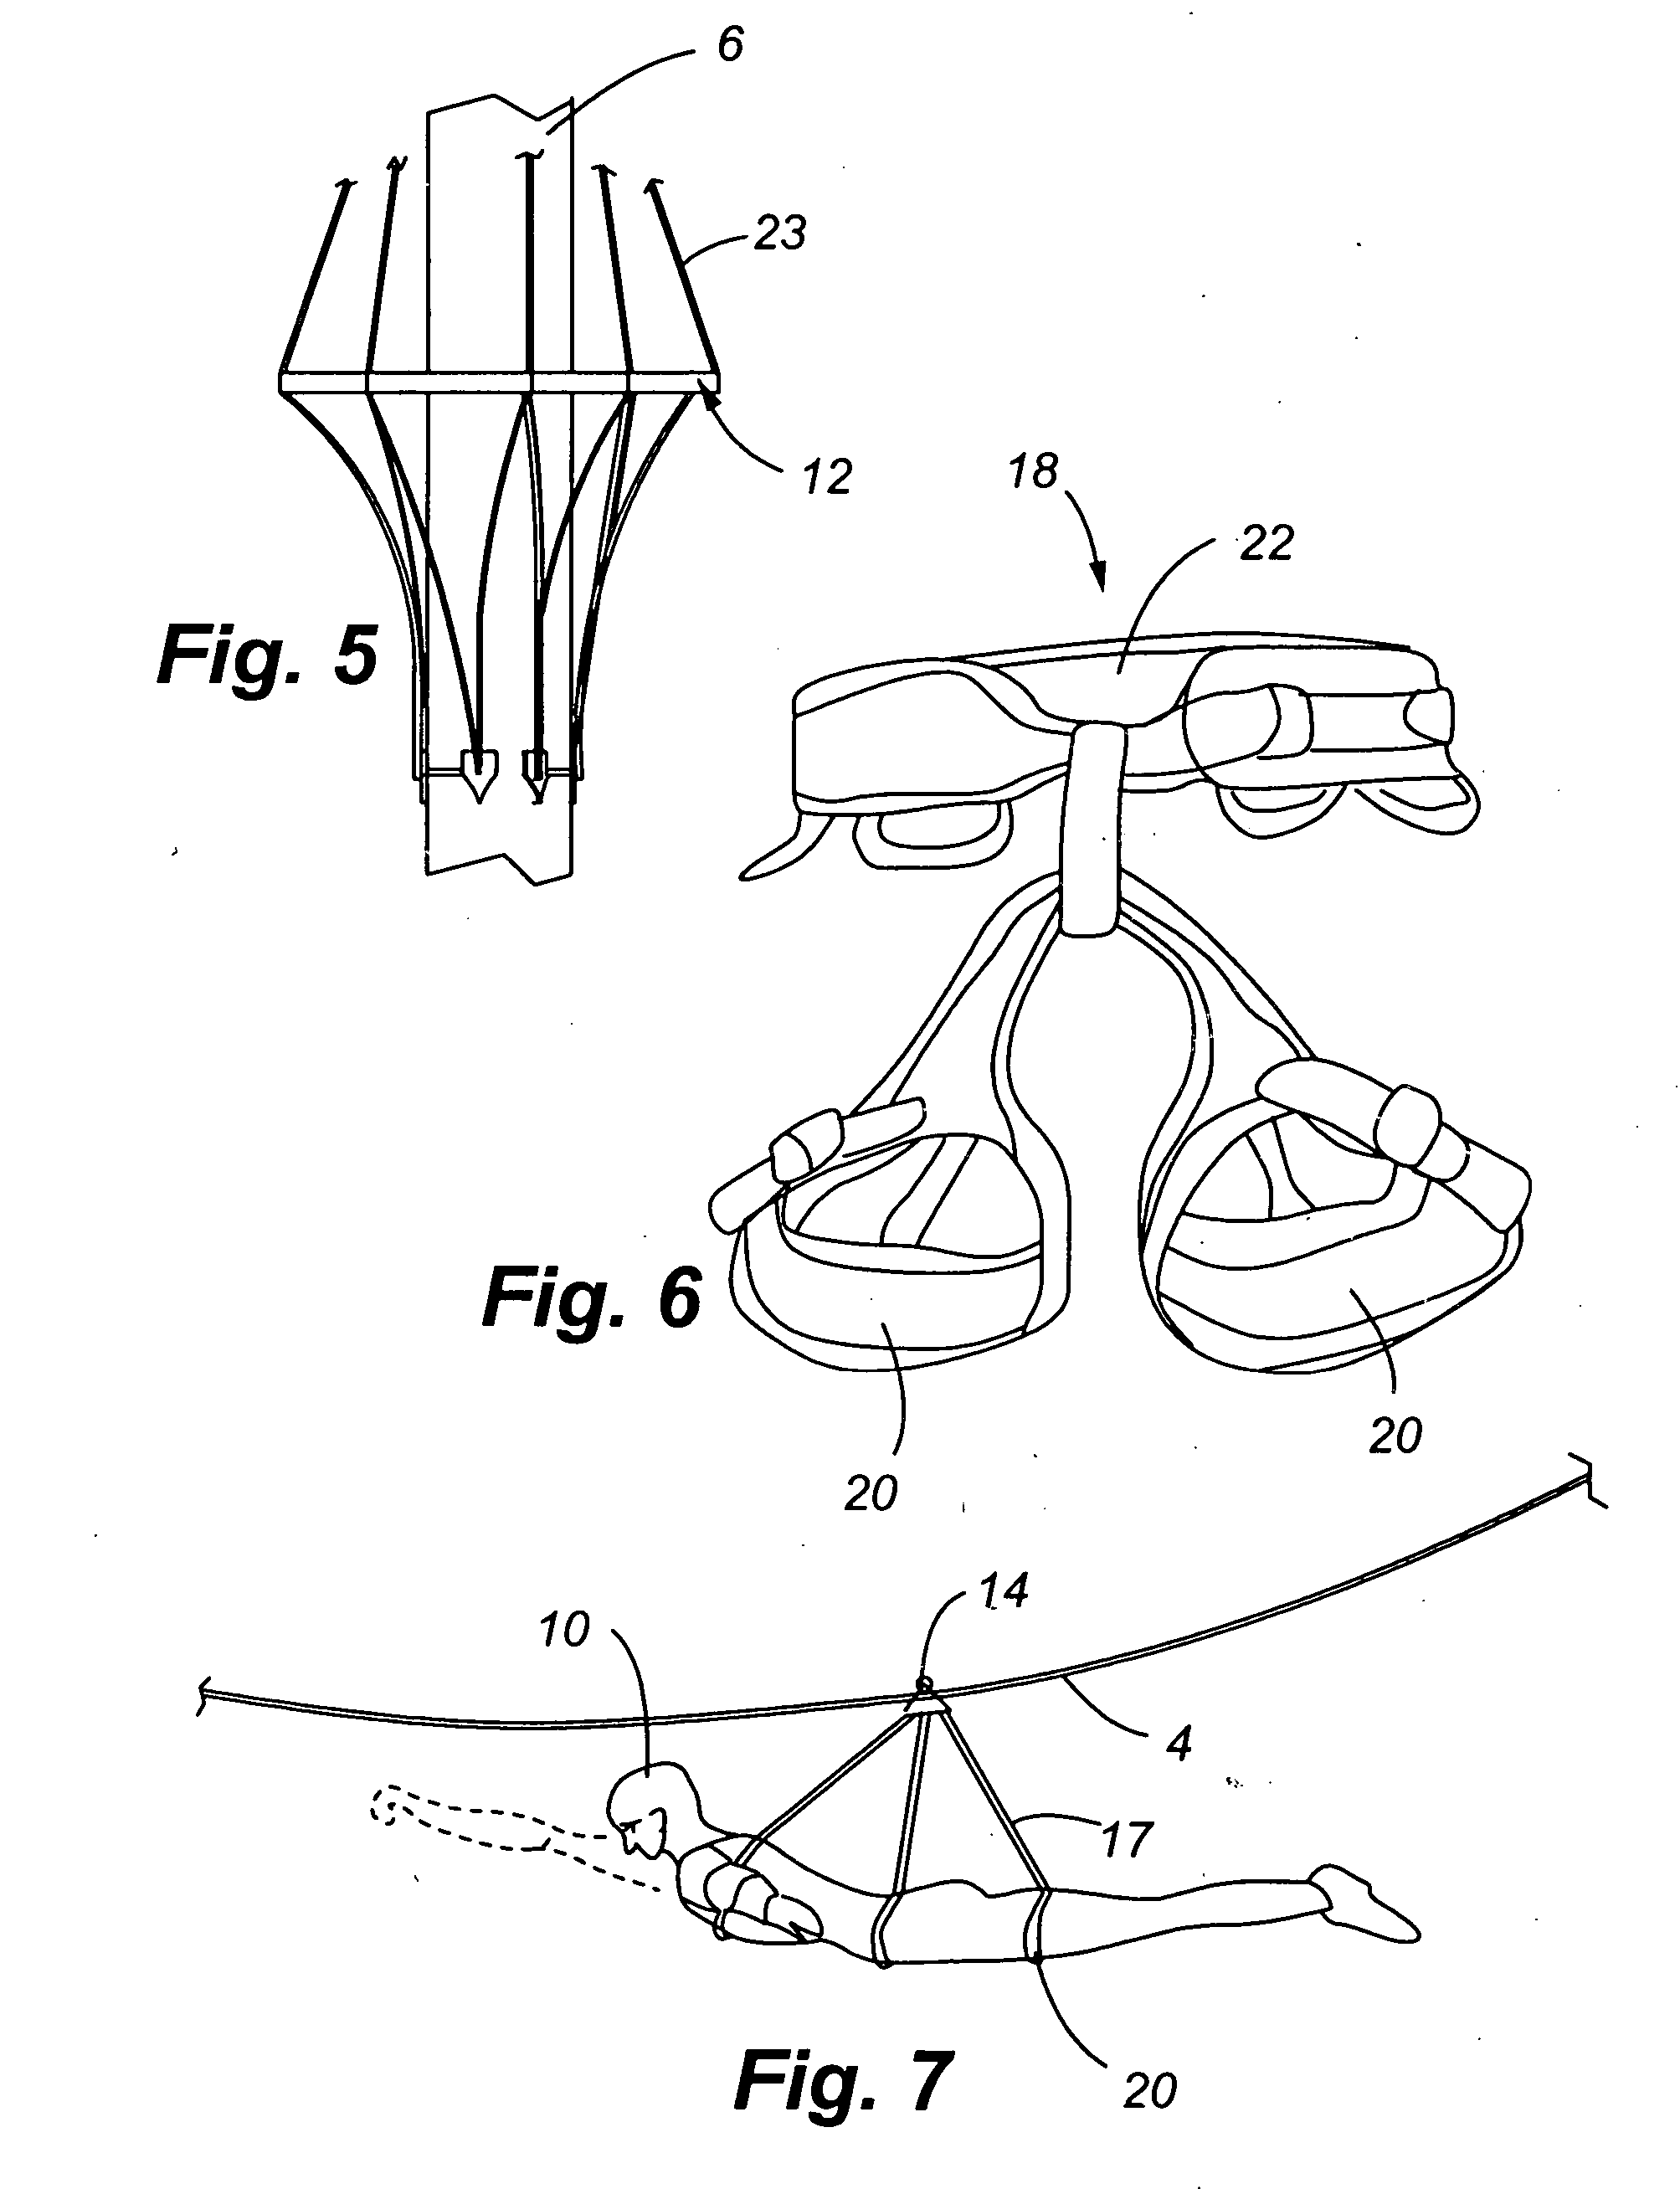 Method and system for transporting a person between a plurality of fixed platforms